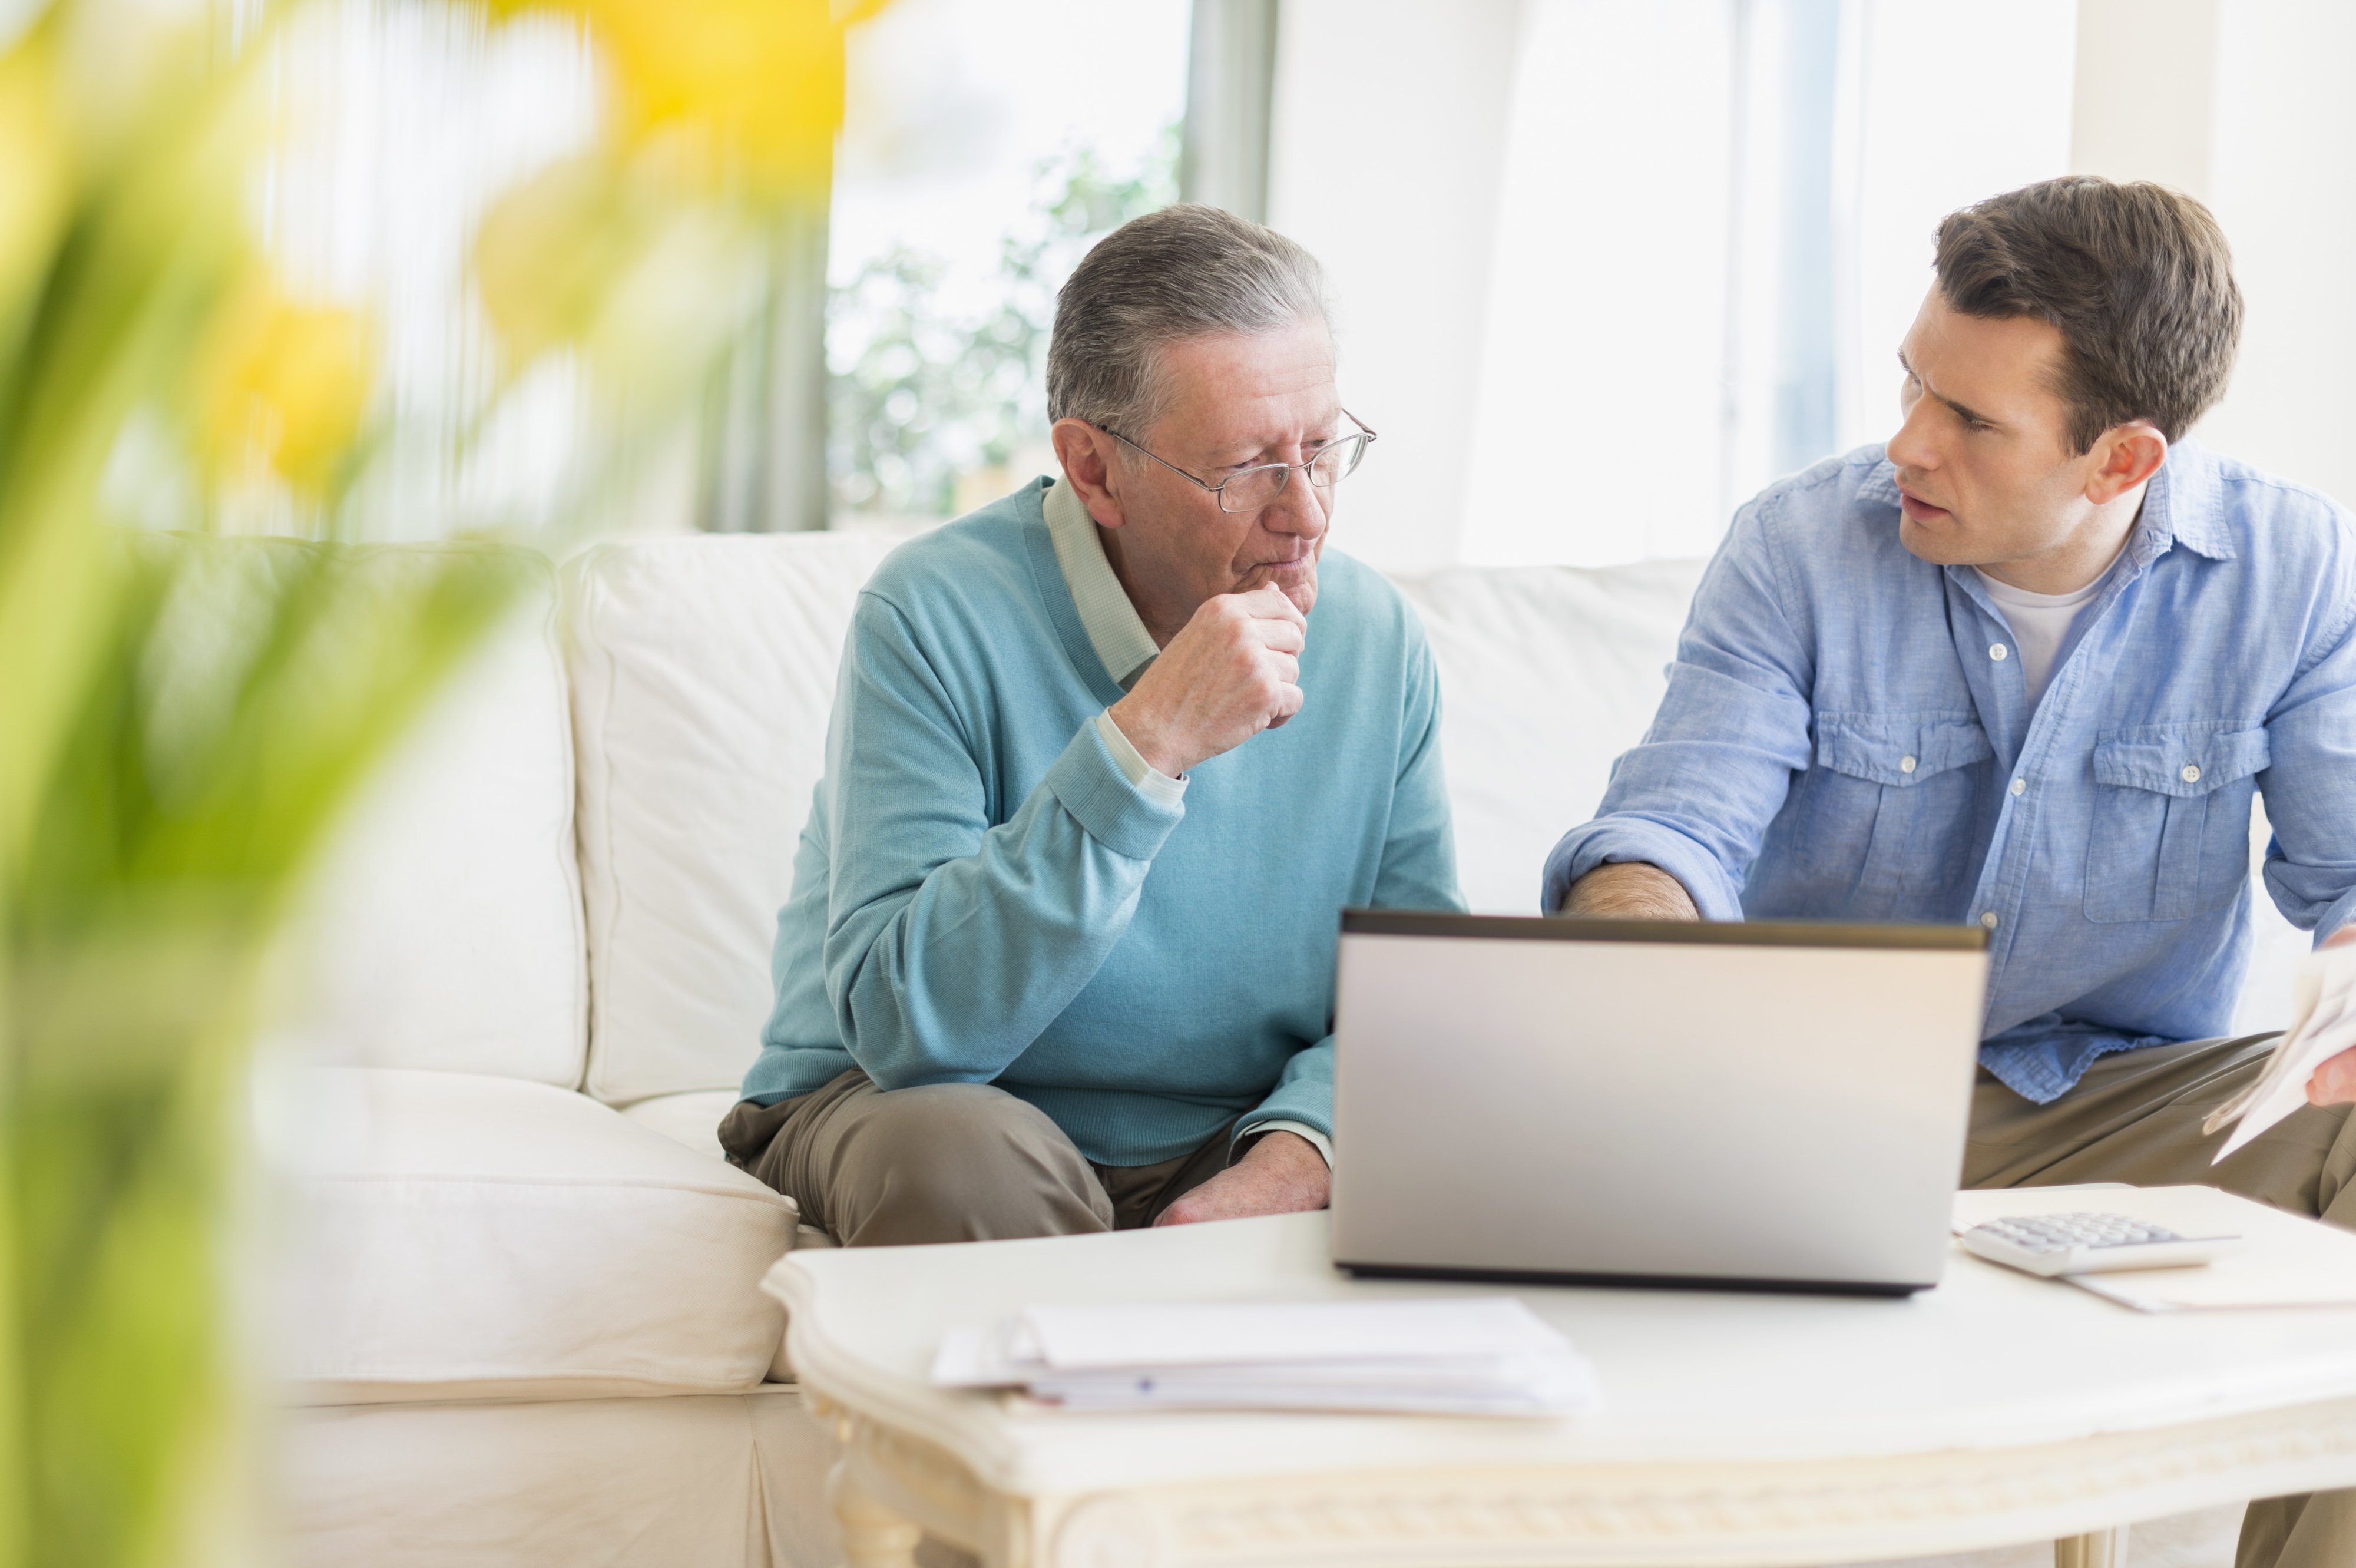 An older man and a younger man are sitting on a couch, discussing something on a laptop